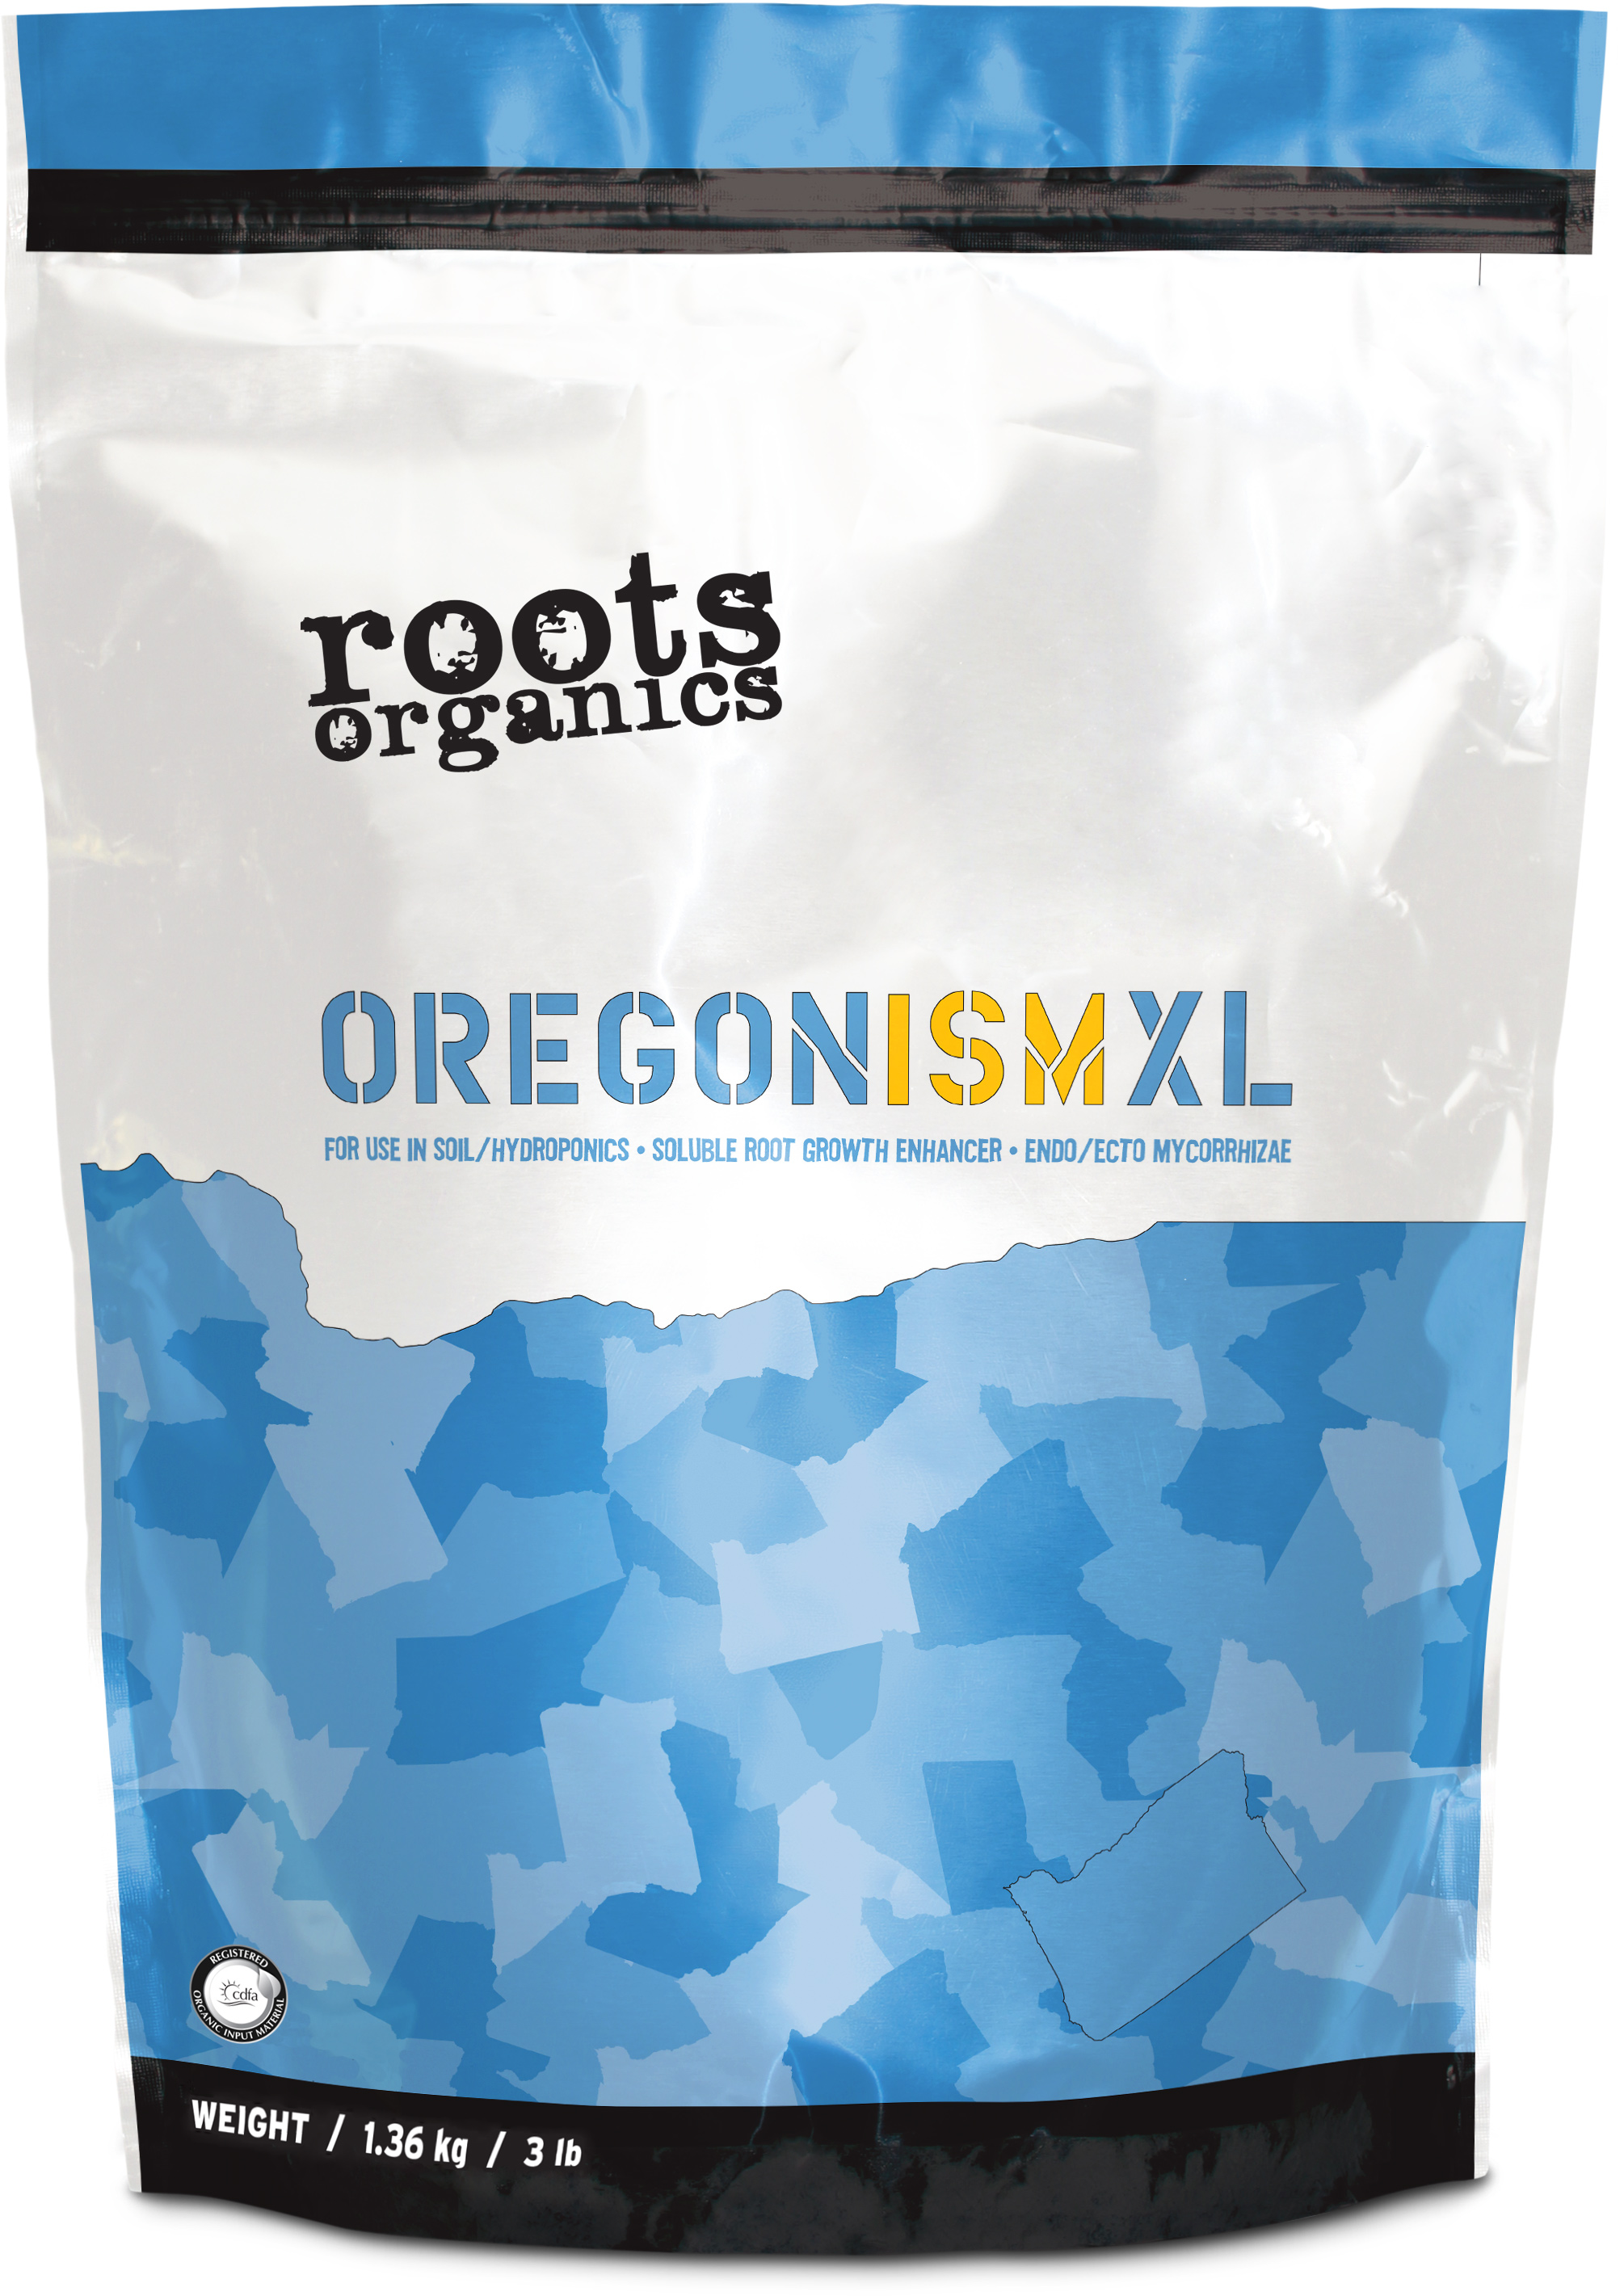 Picture for Roots Organics Oregonism XL, 3 lbs